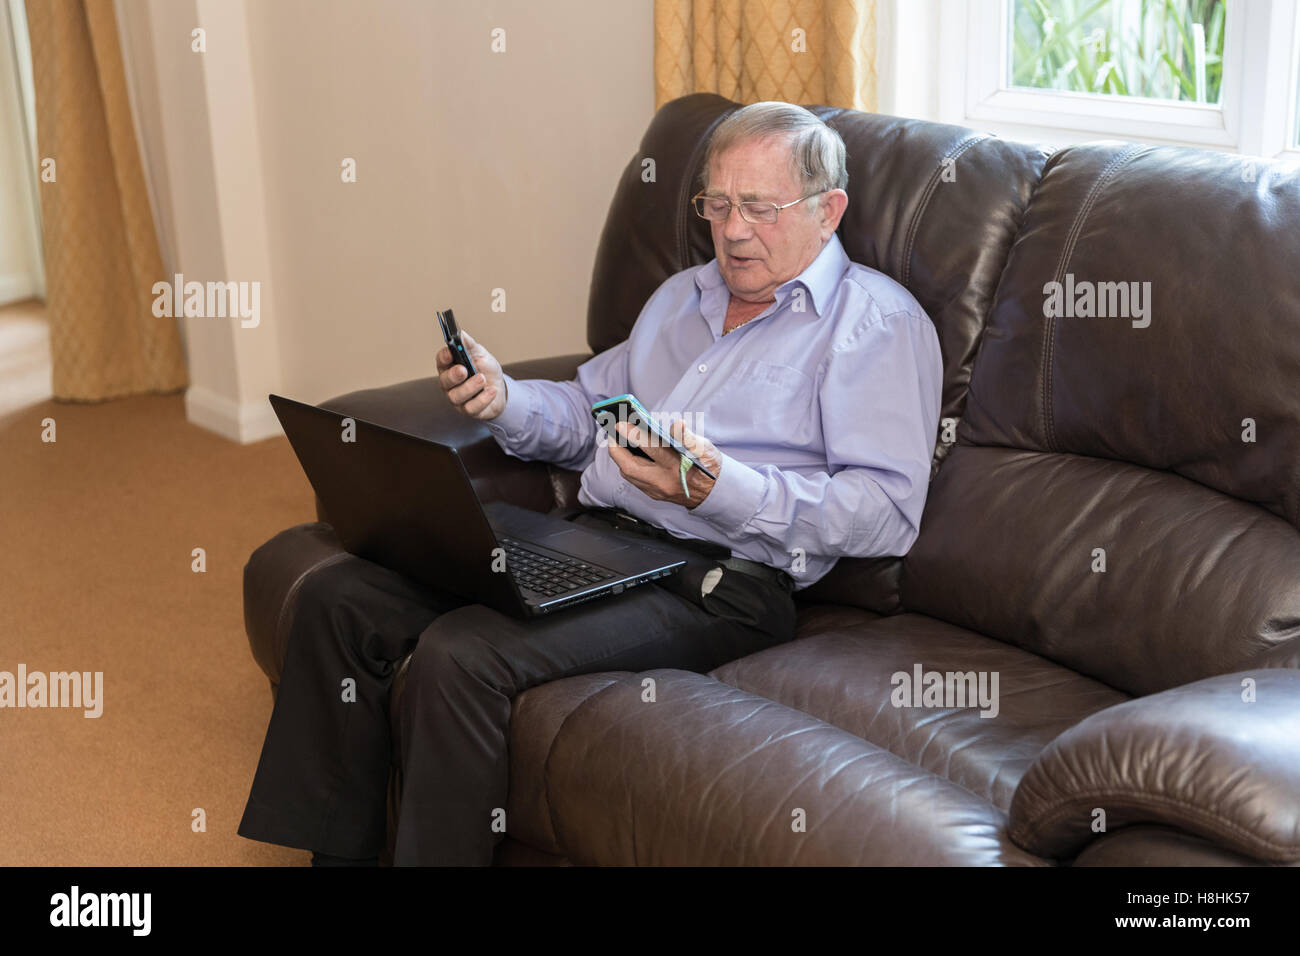 Old age Pensioner trying to use modern electronic devices like laptop and mobile phone. Stock Photo